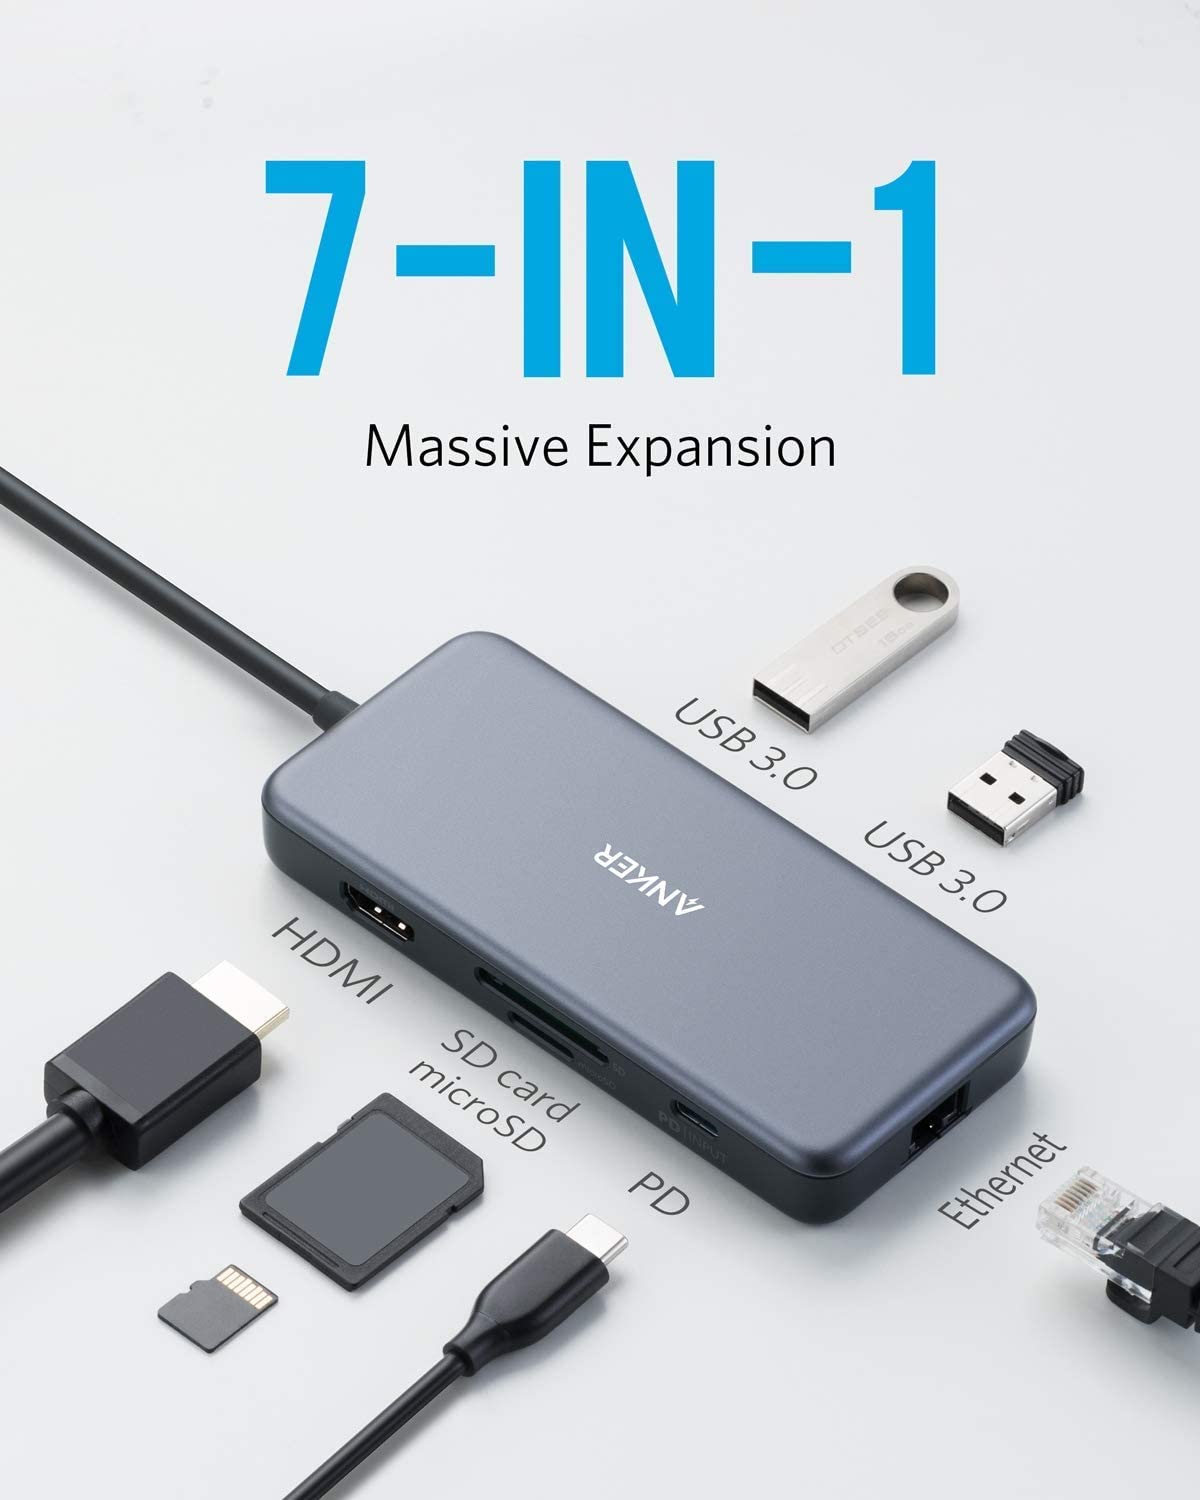 Anker USB C Hub Adapter PowerExpand+ 7-in-1